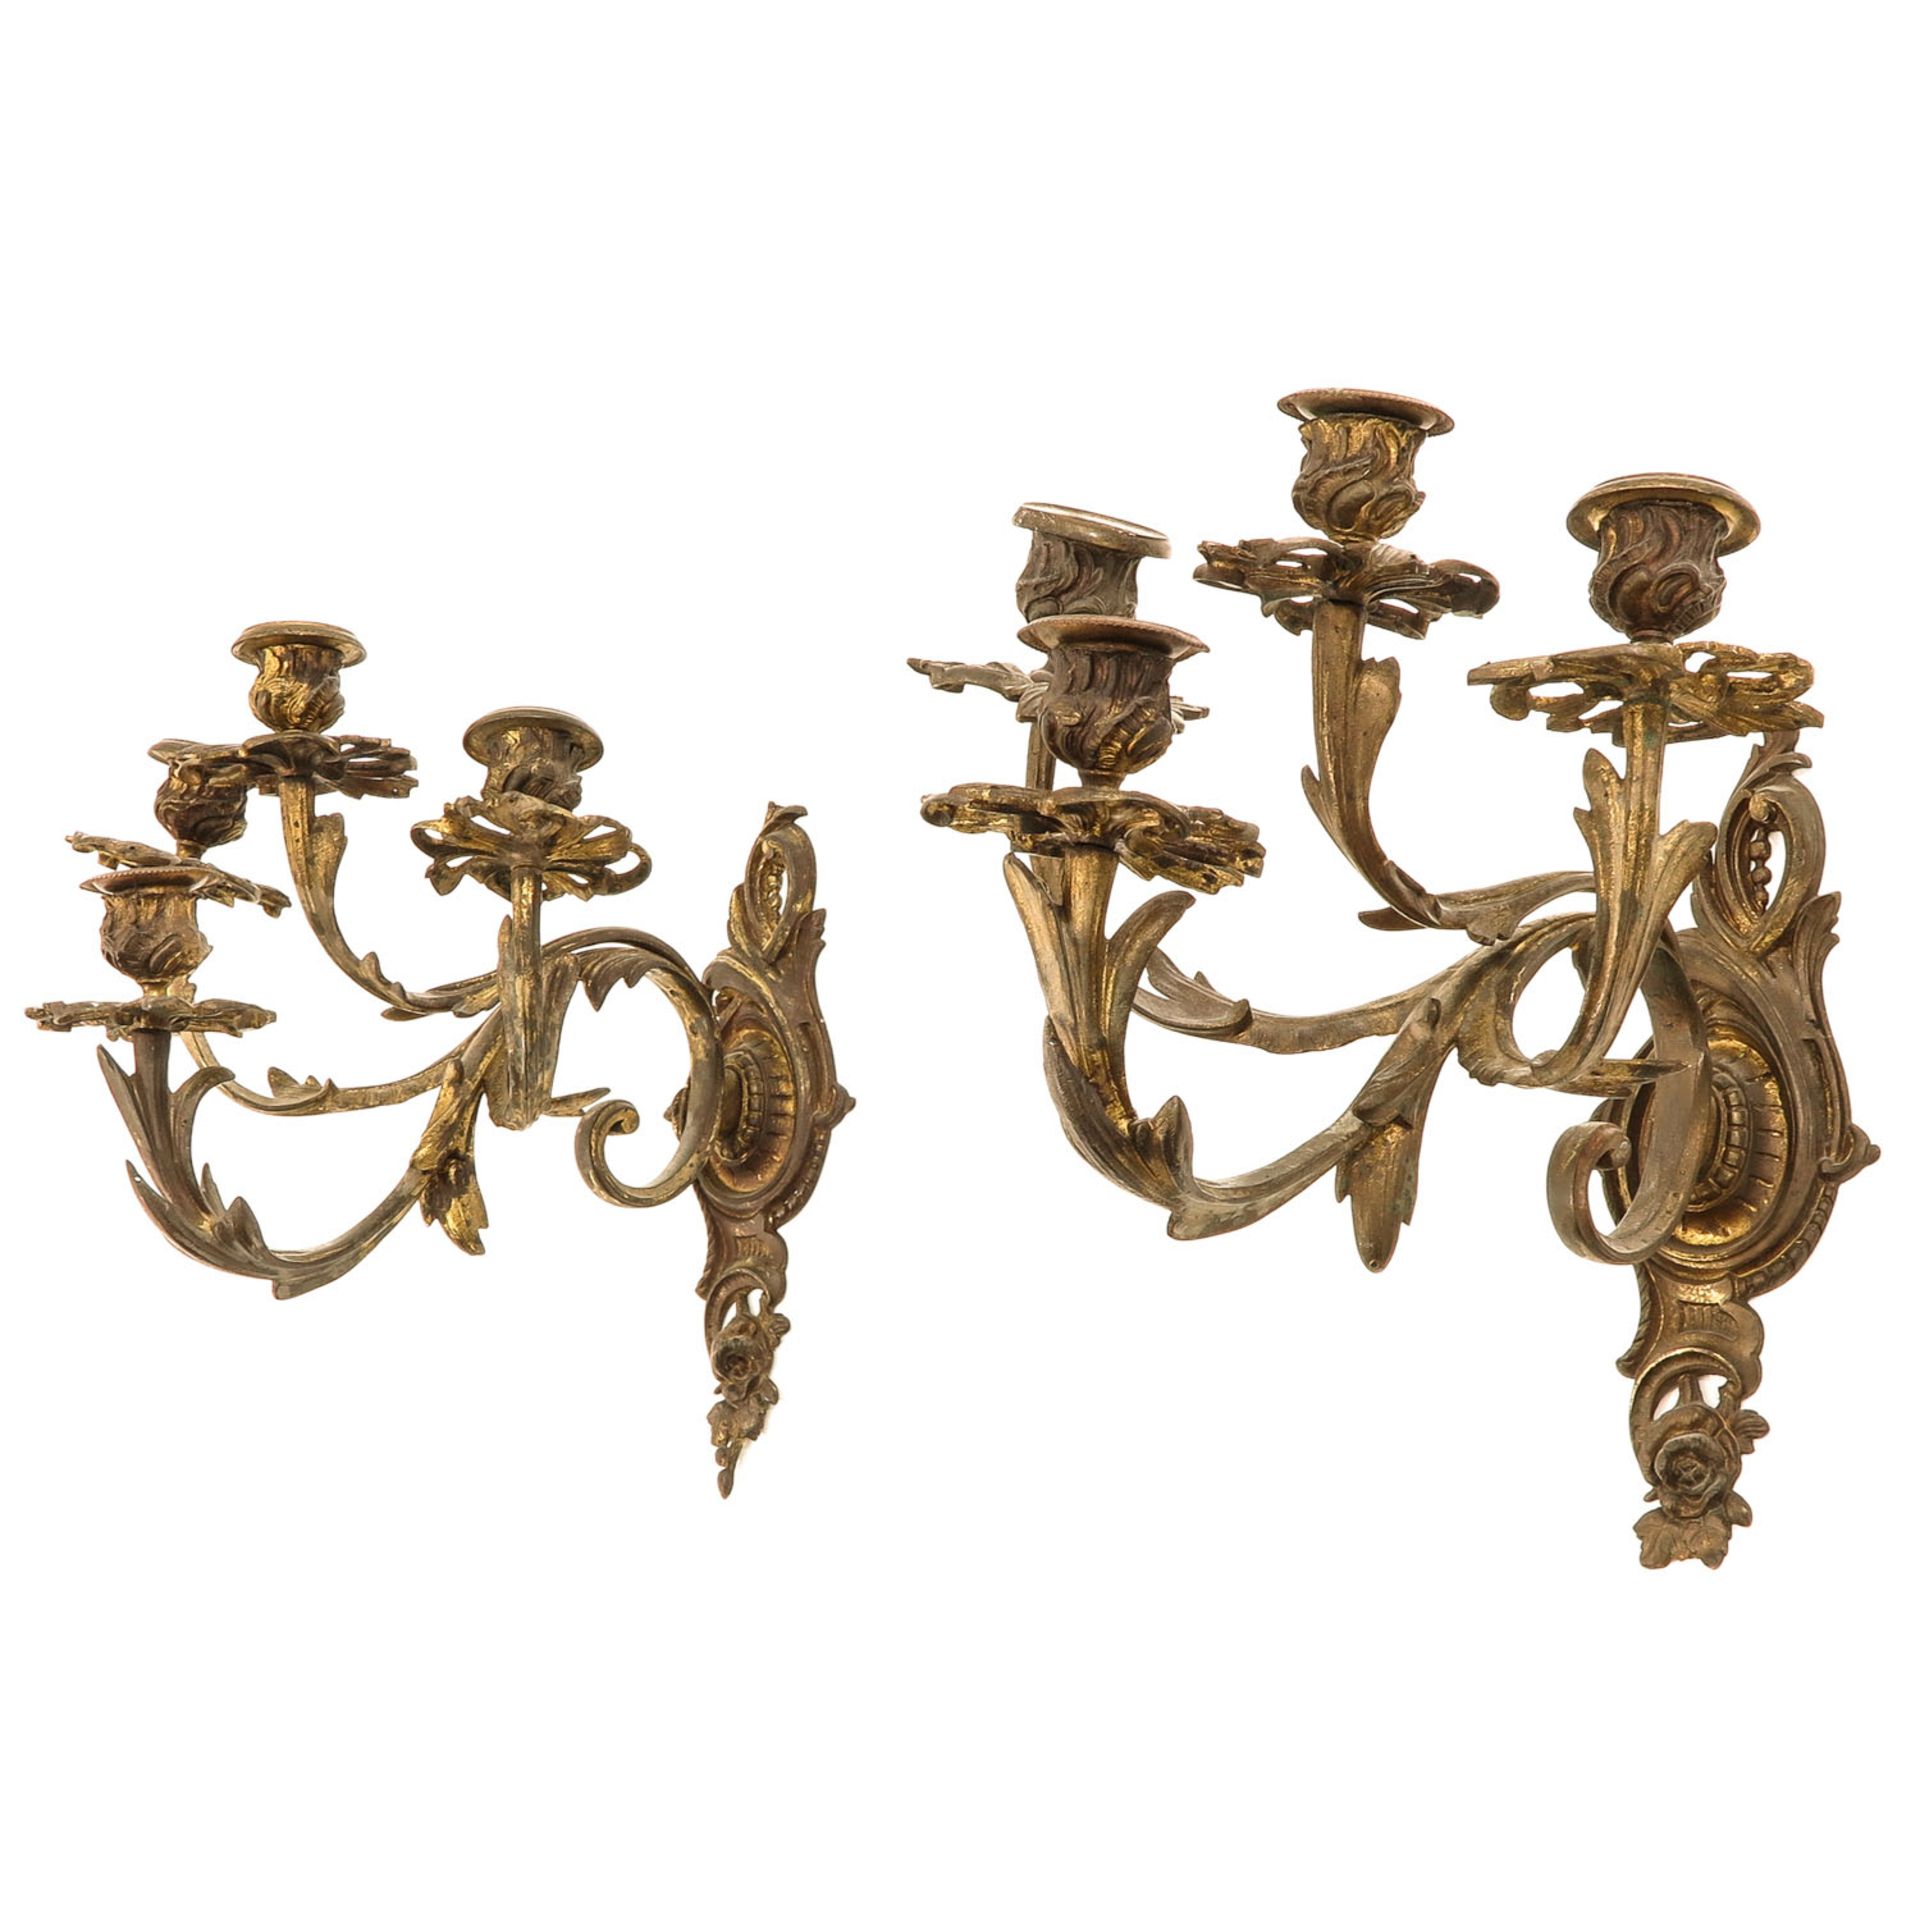 A Pair of 19th Century Bronze Candlesticks - Image 3 of 6